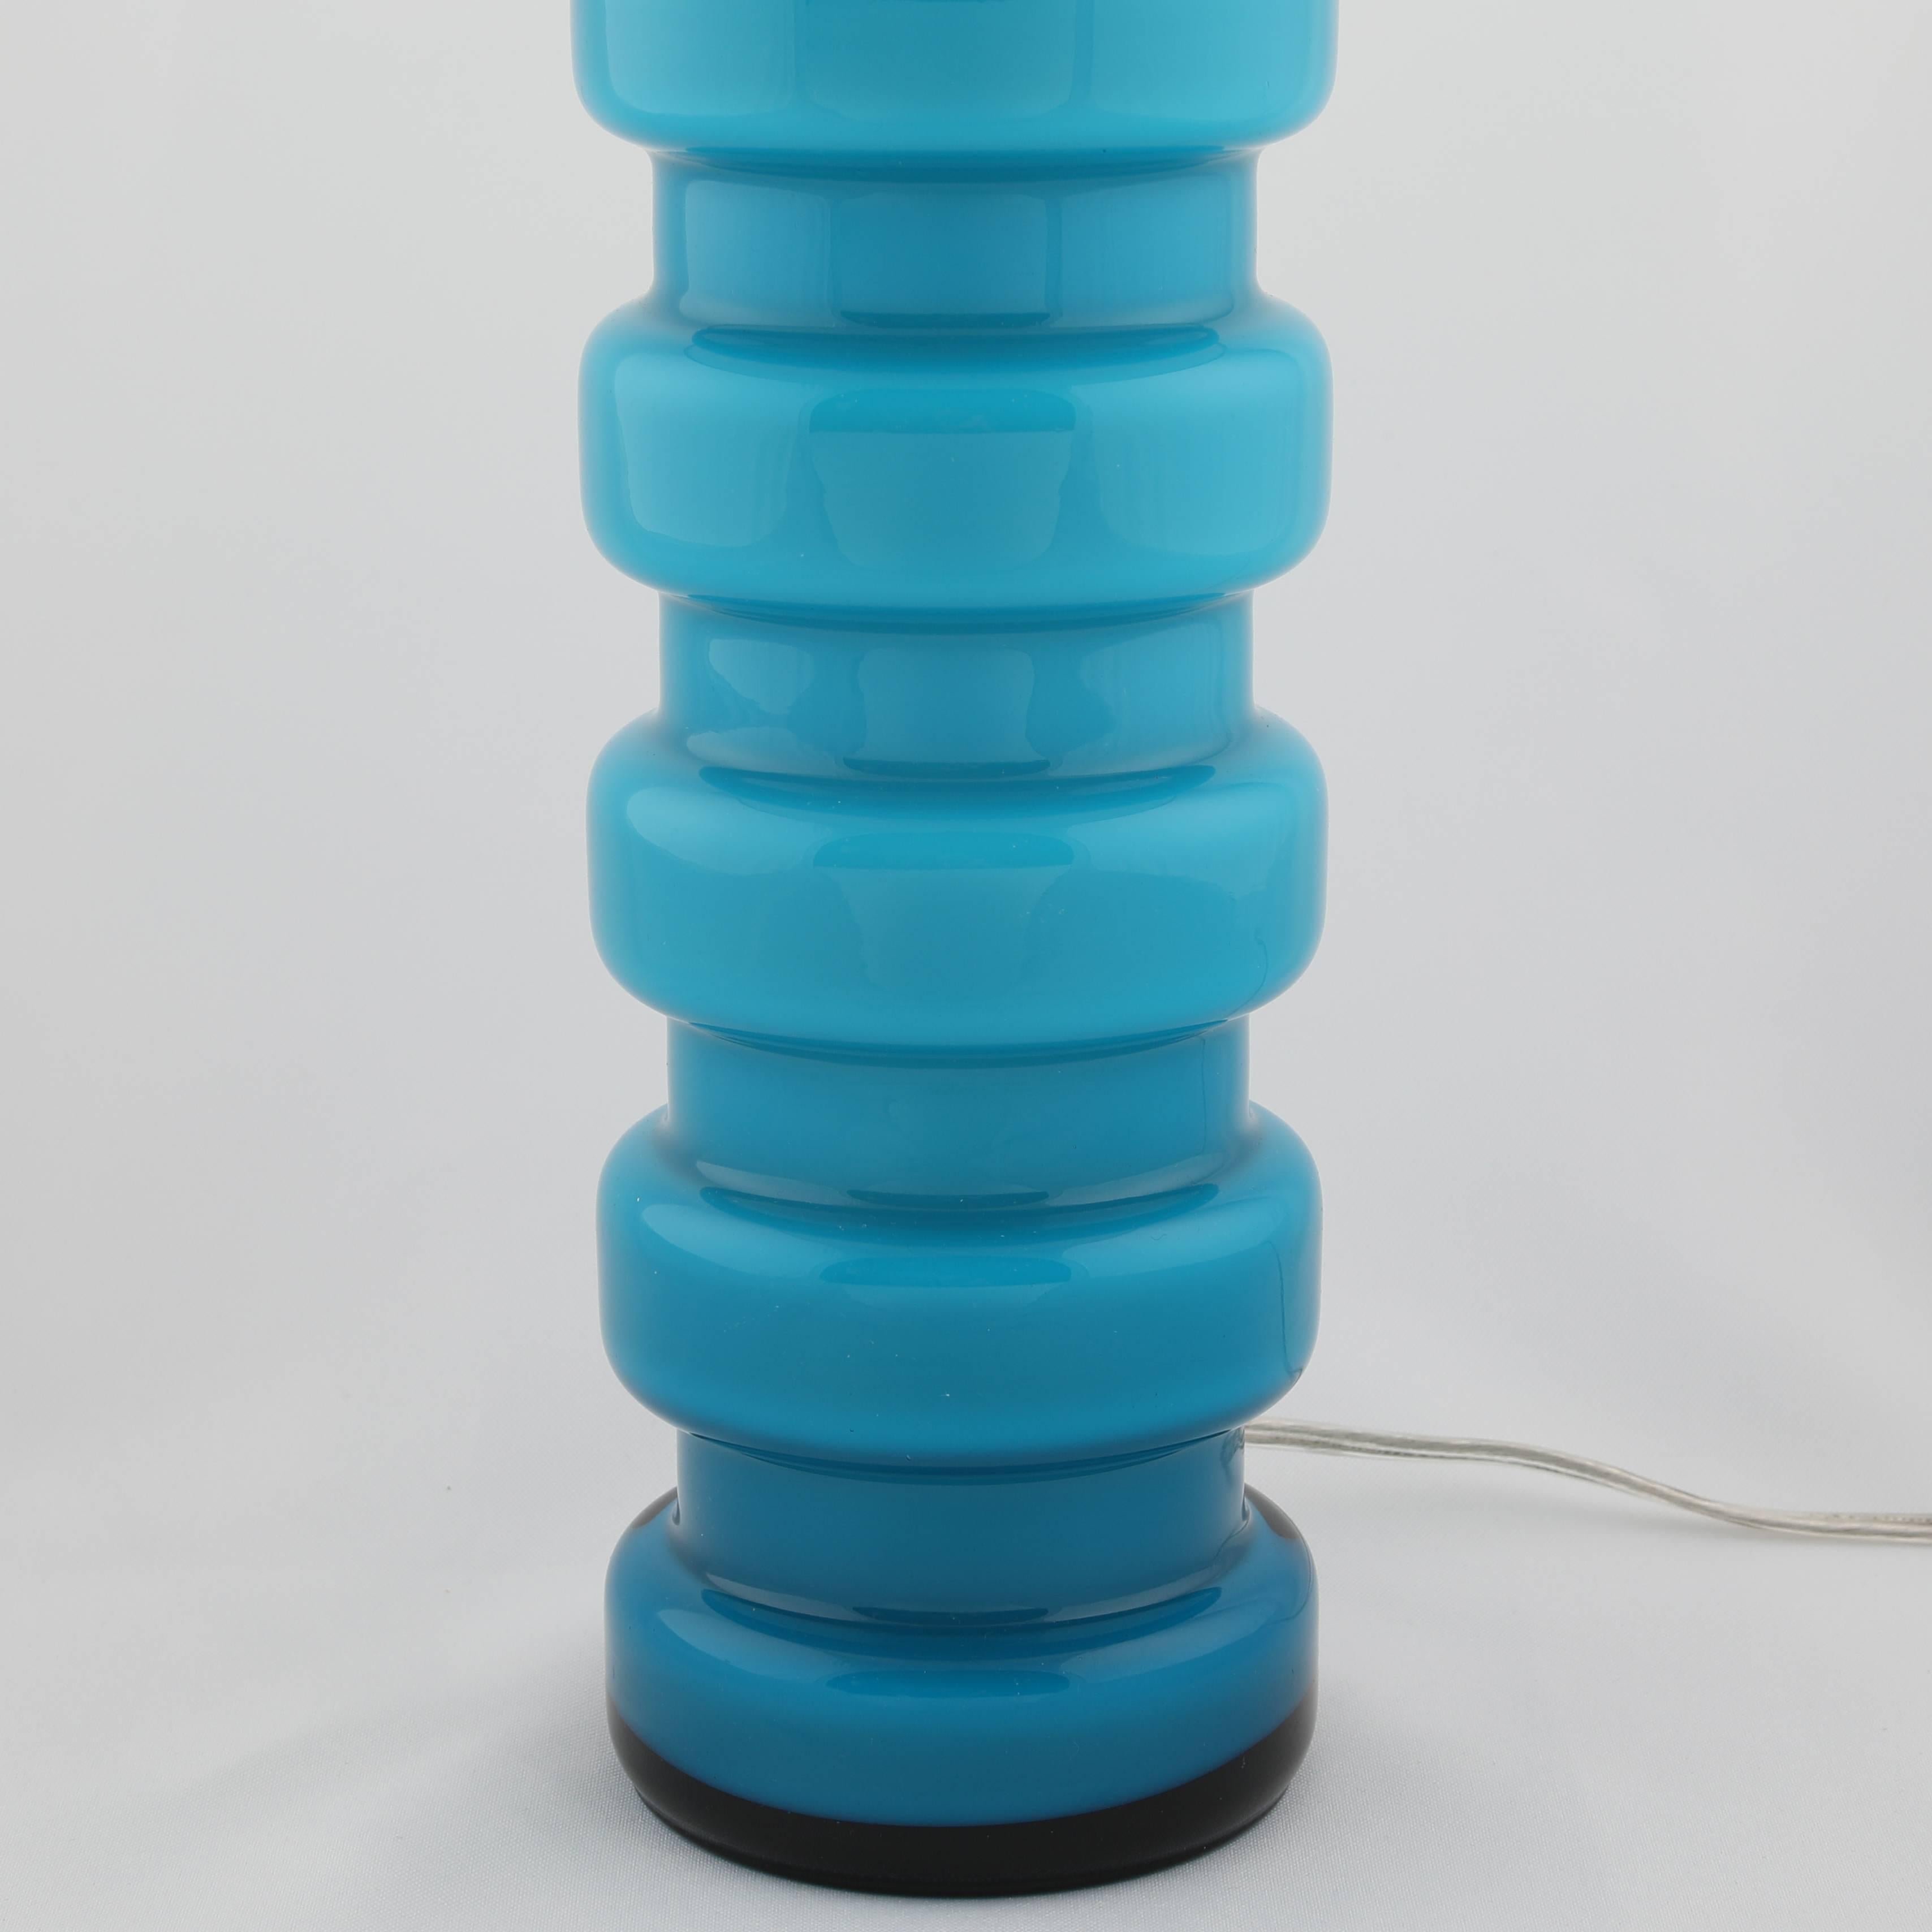 Mid-20th Century Blue Cased-Glass Table Lamps by Pers-Olof Ström for Alsterfors, circa 1960s